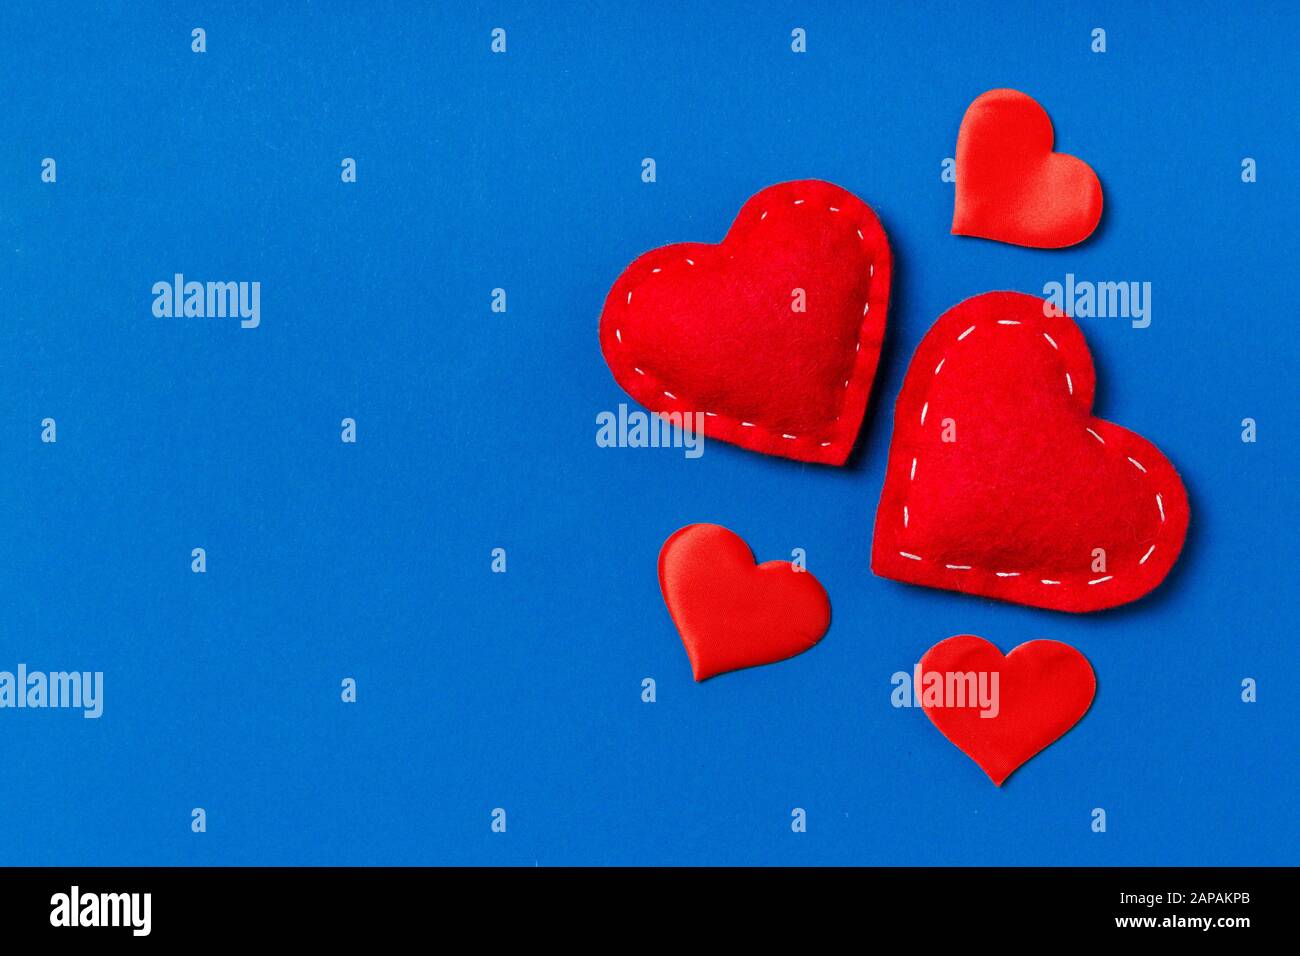 Top view composition of red hearts on colorful background. Romantic relationship concept. Valentaine's Day. Stock Photo